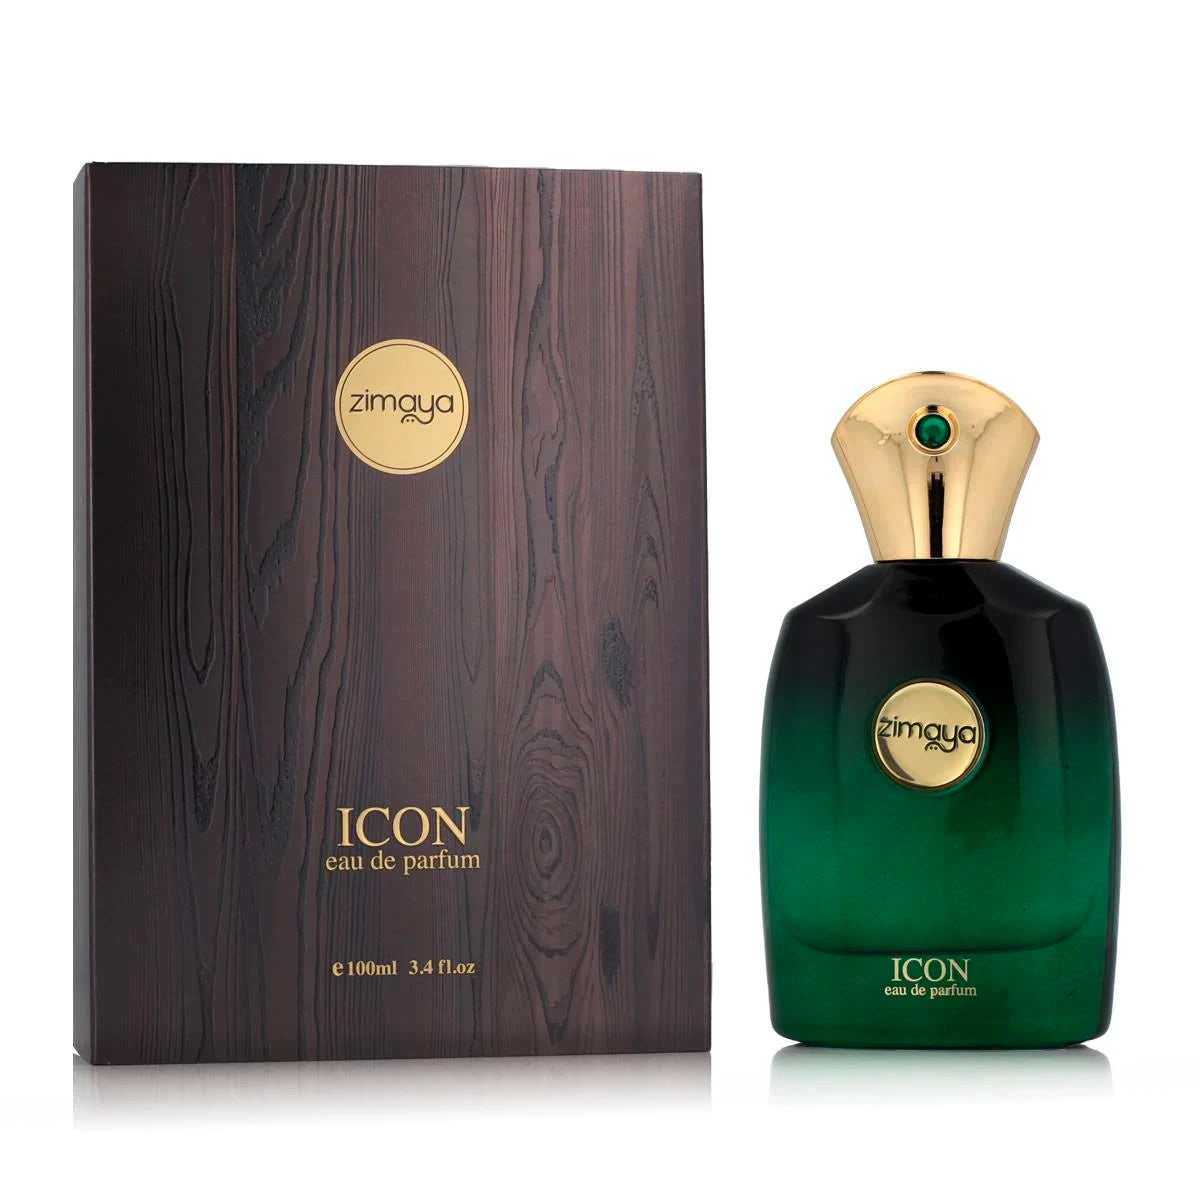 <p data-mce-fragment="1">Embark on a journey of contrast with Zimaya Icon Eau De Parfum. This deep, woody scent showcases notes of sandalwood, cedar, and ambergris, evoking power and grace. With its timeless sophistication and mysterious depths, this fragrance is truly an iconic scent for those who appreciate the finer things in life.</p>